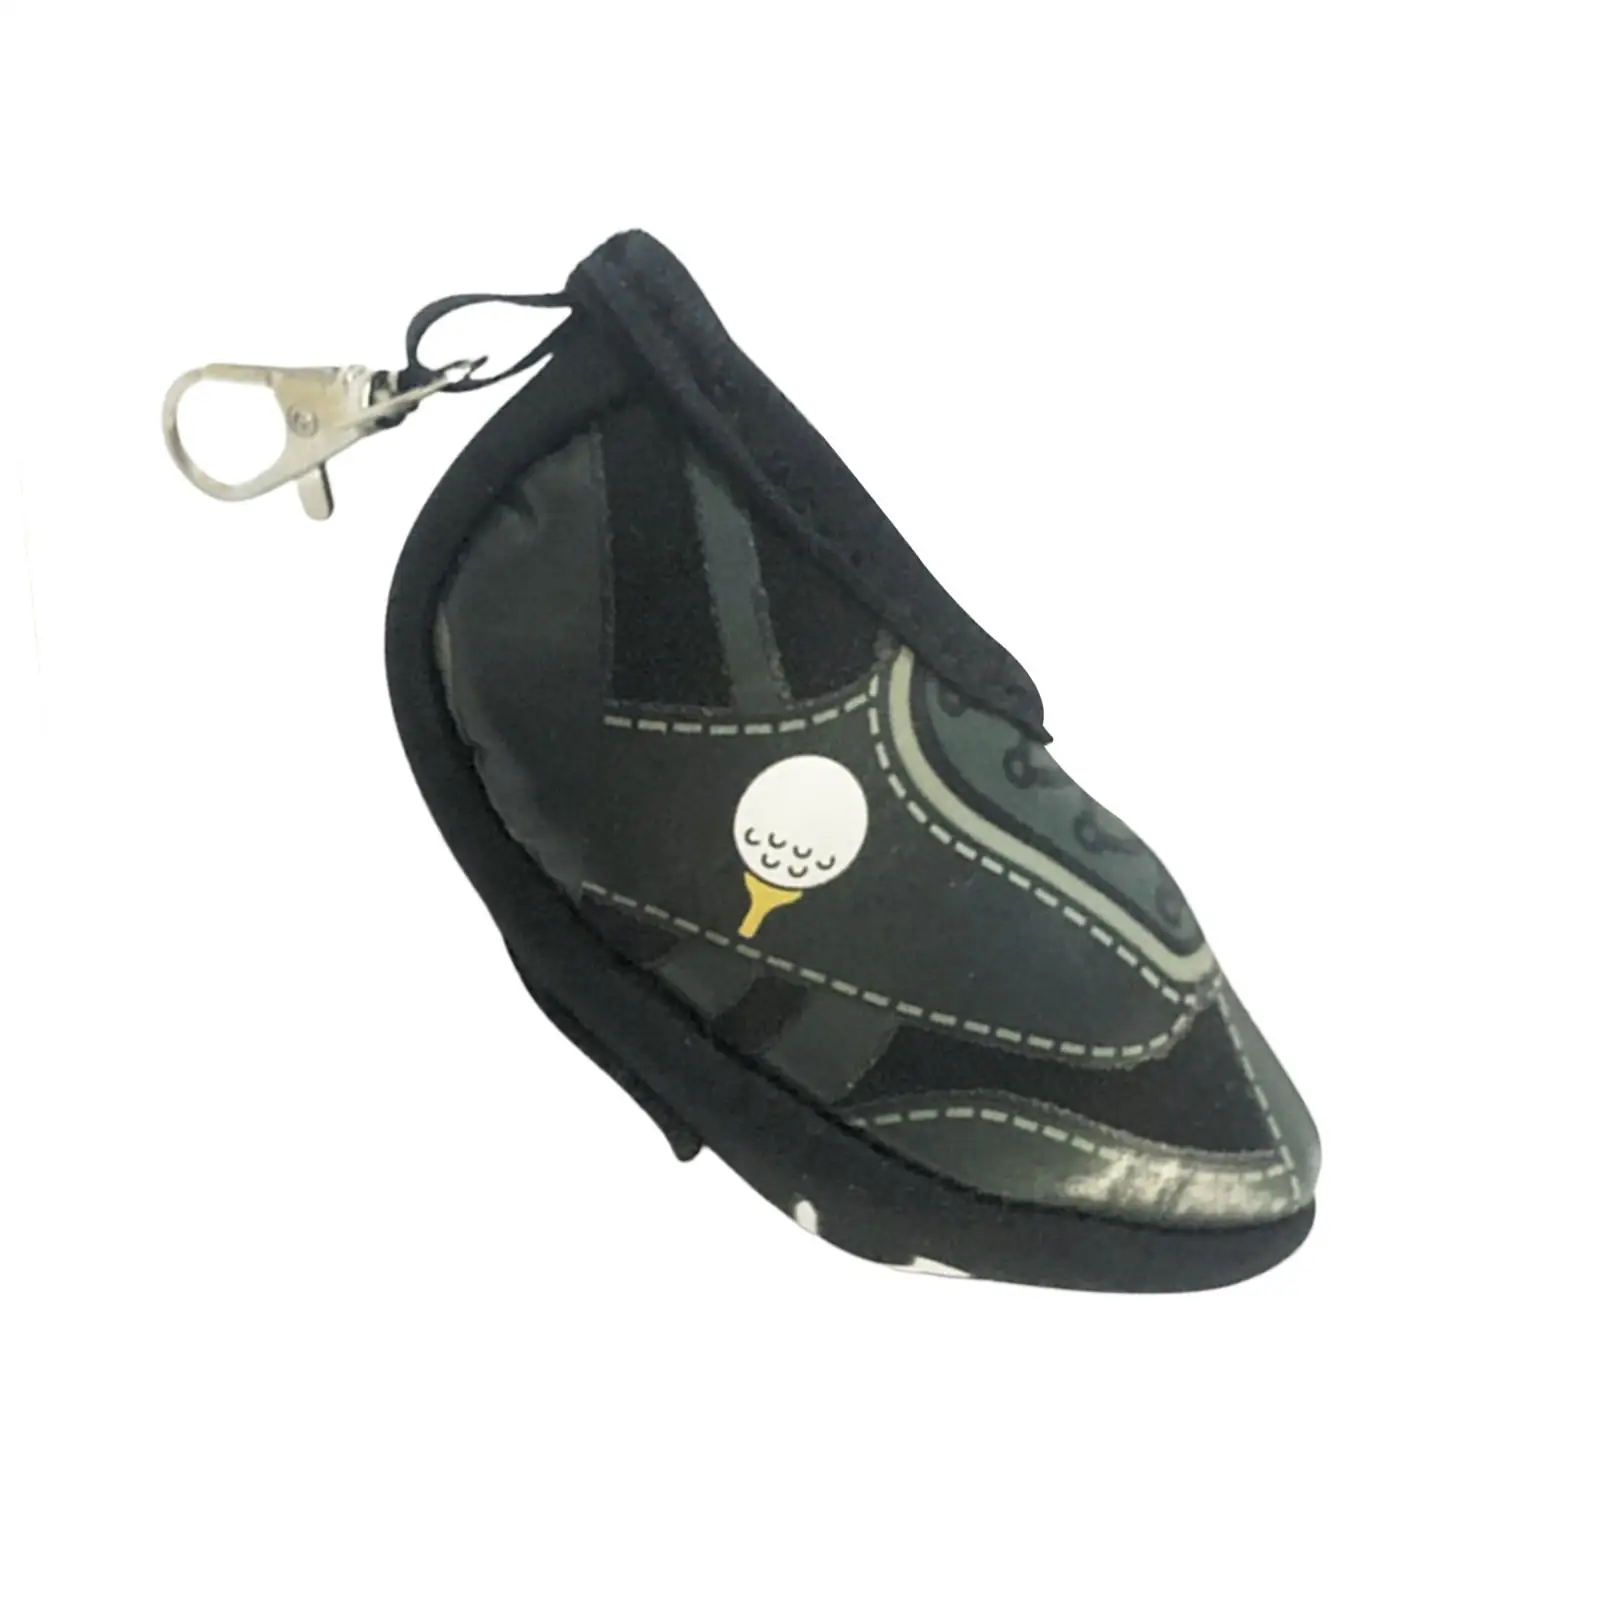 Neoprene Golf Ball Carry Bag with Hook Small Training Equipment Golf Accessories Pouch